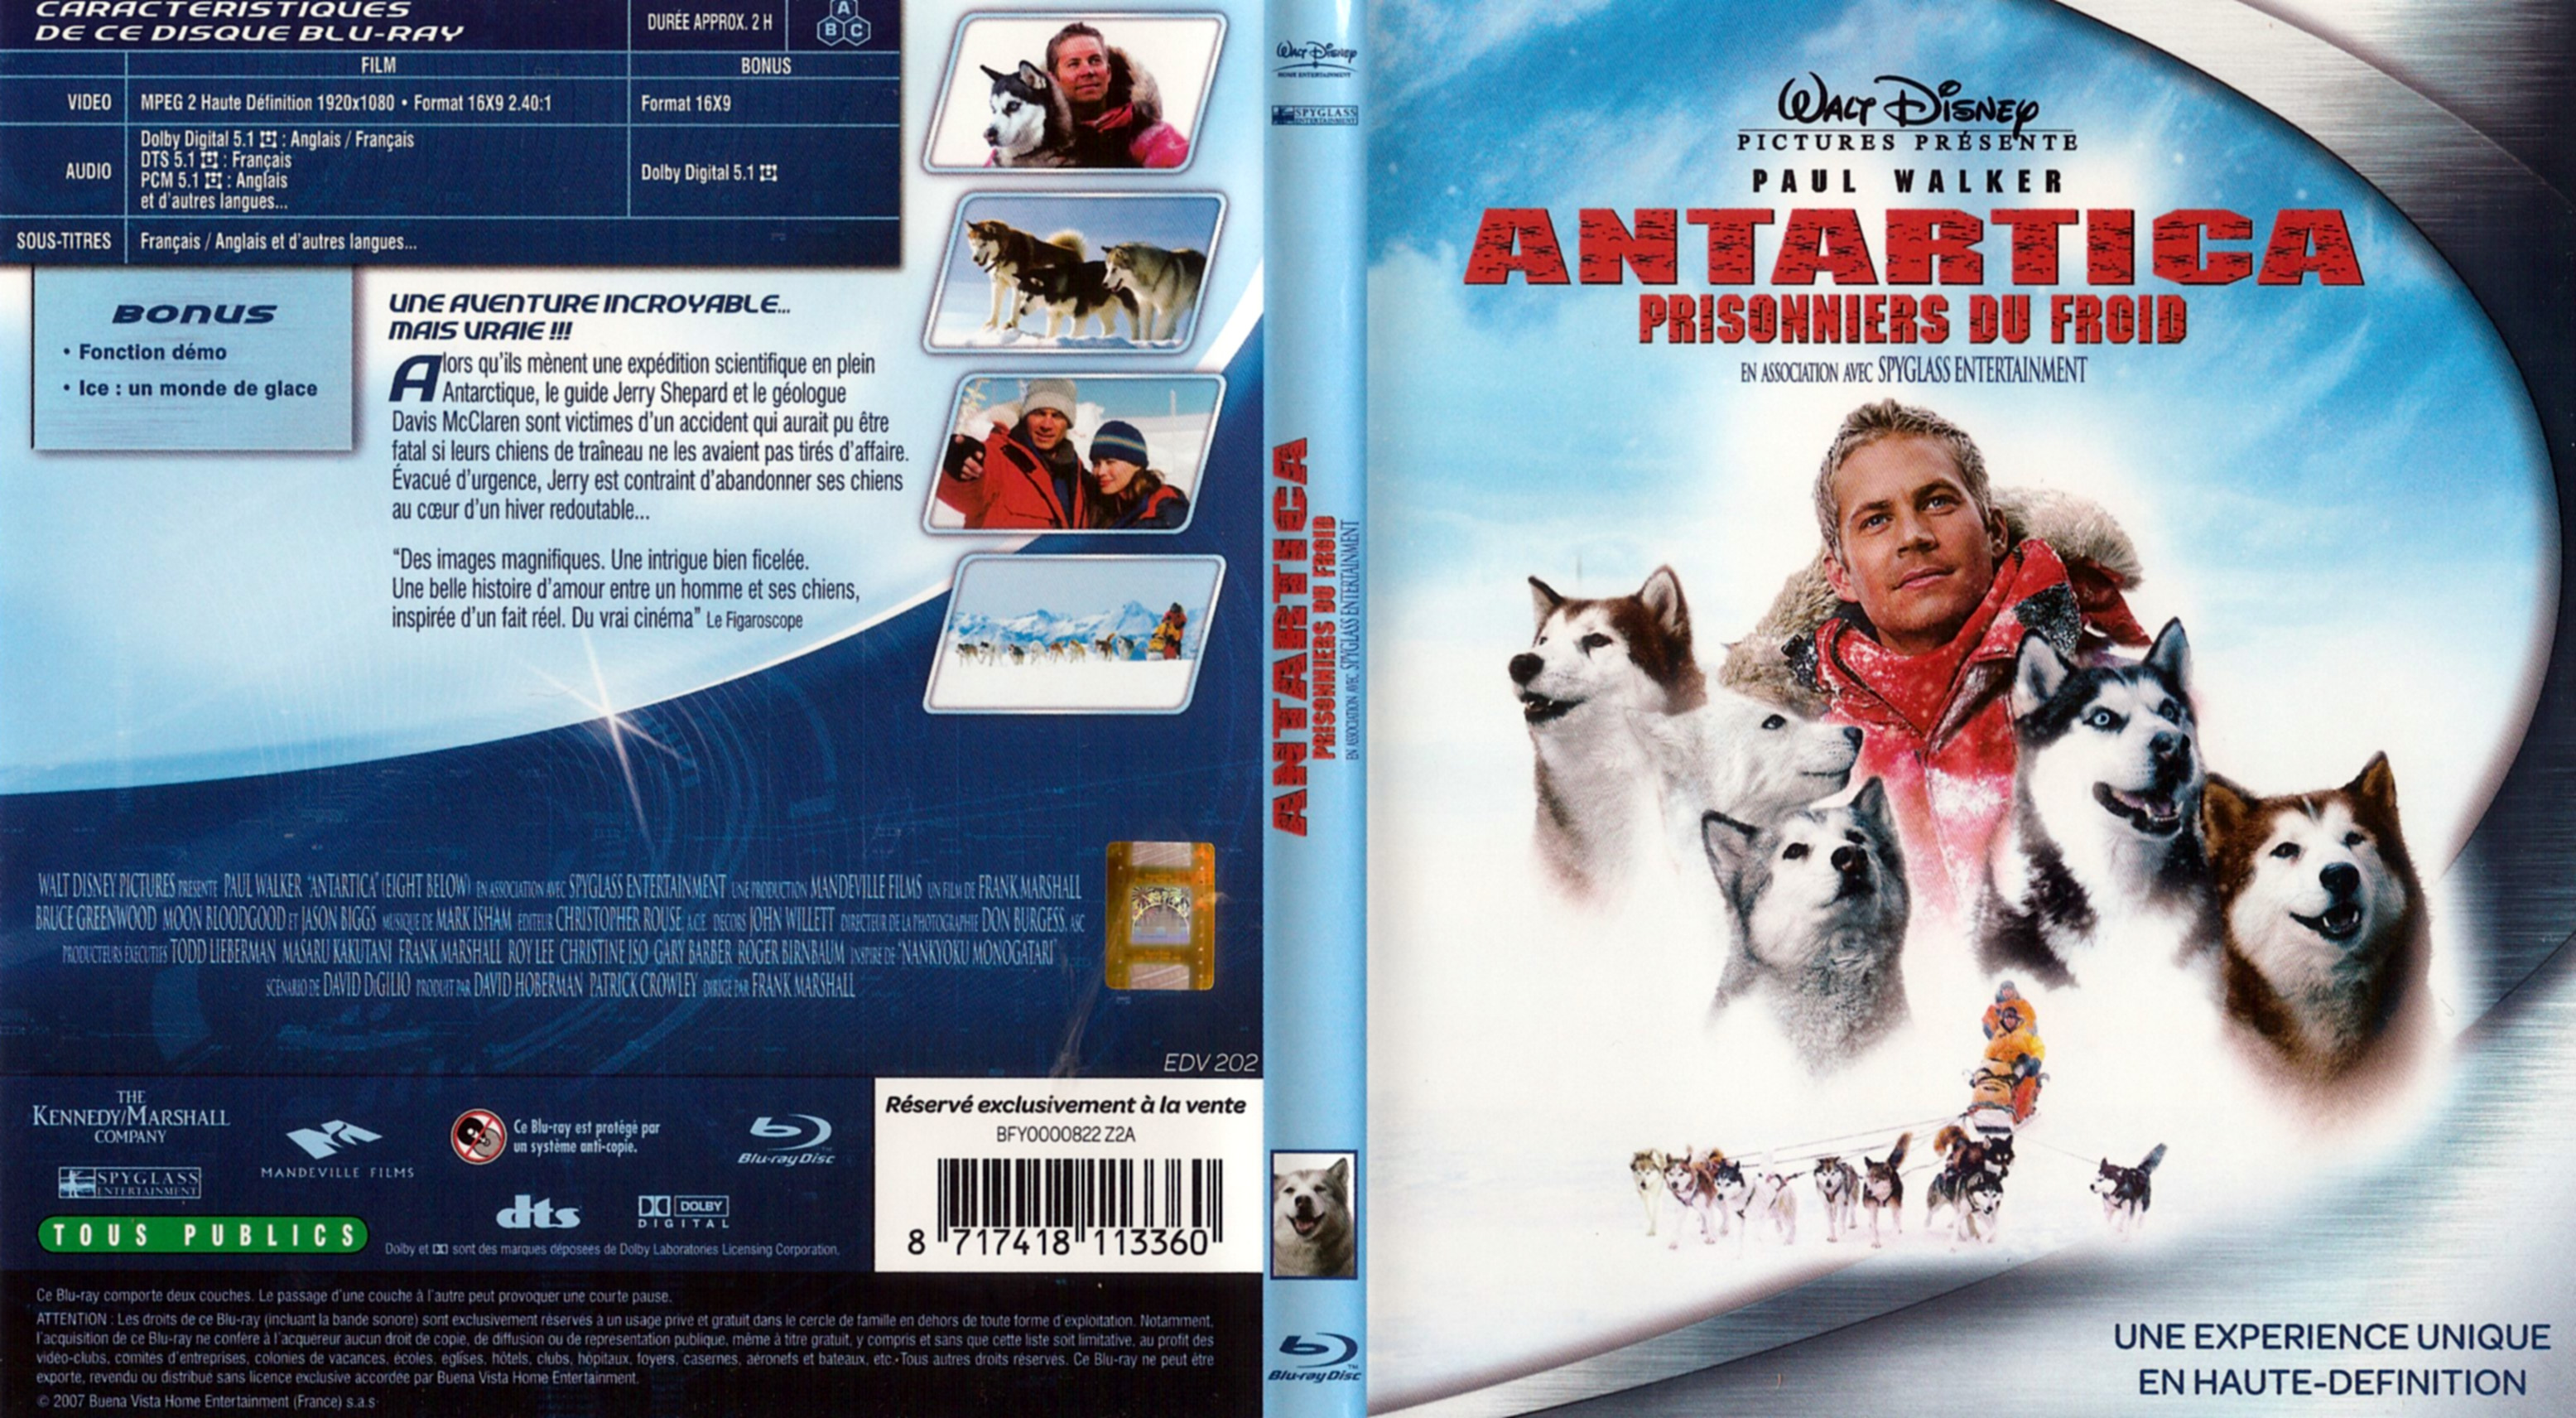 Jaquette DVD Antartica prisonniers du froid (BLU-RAY)